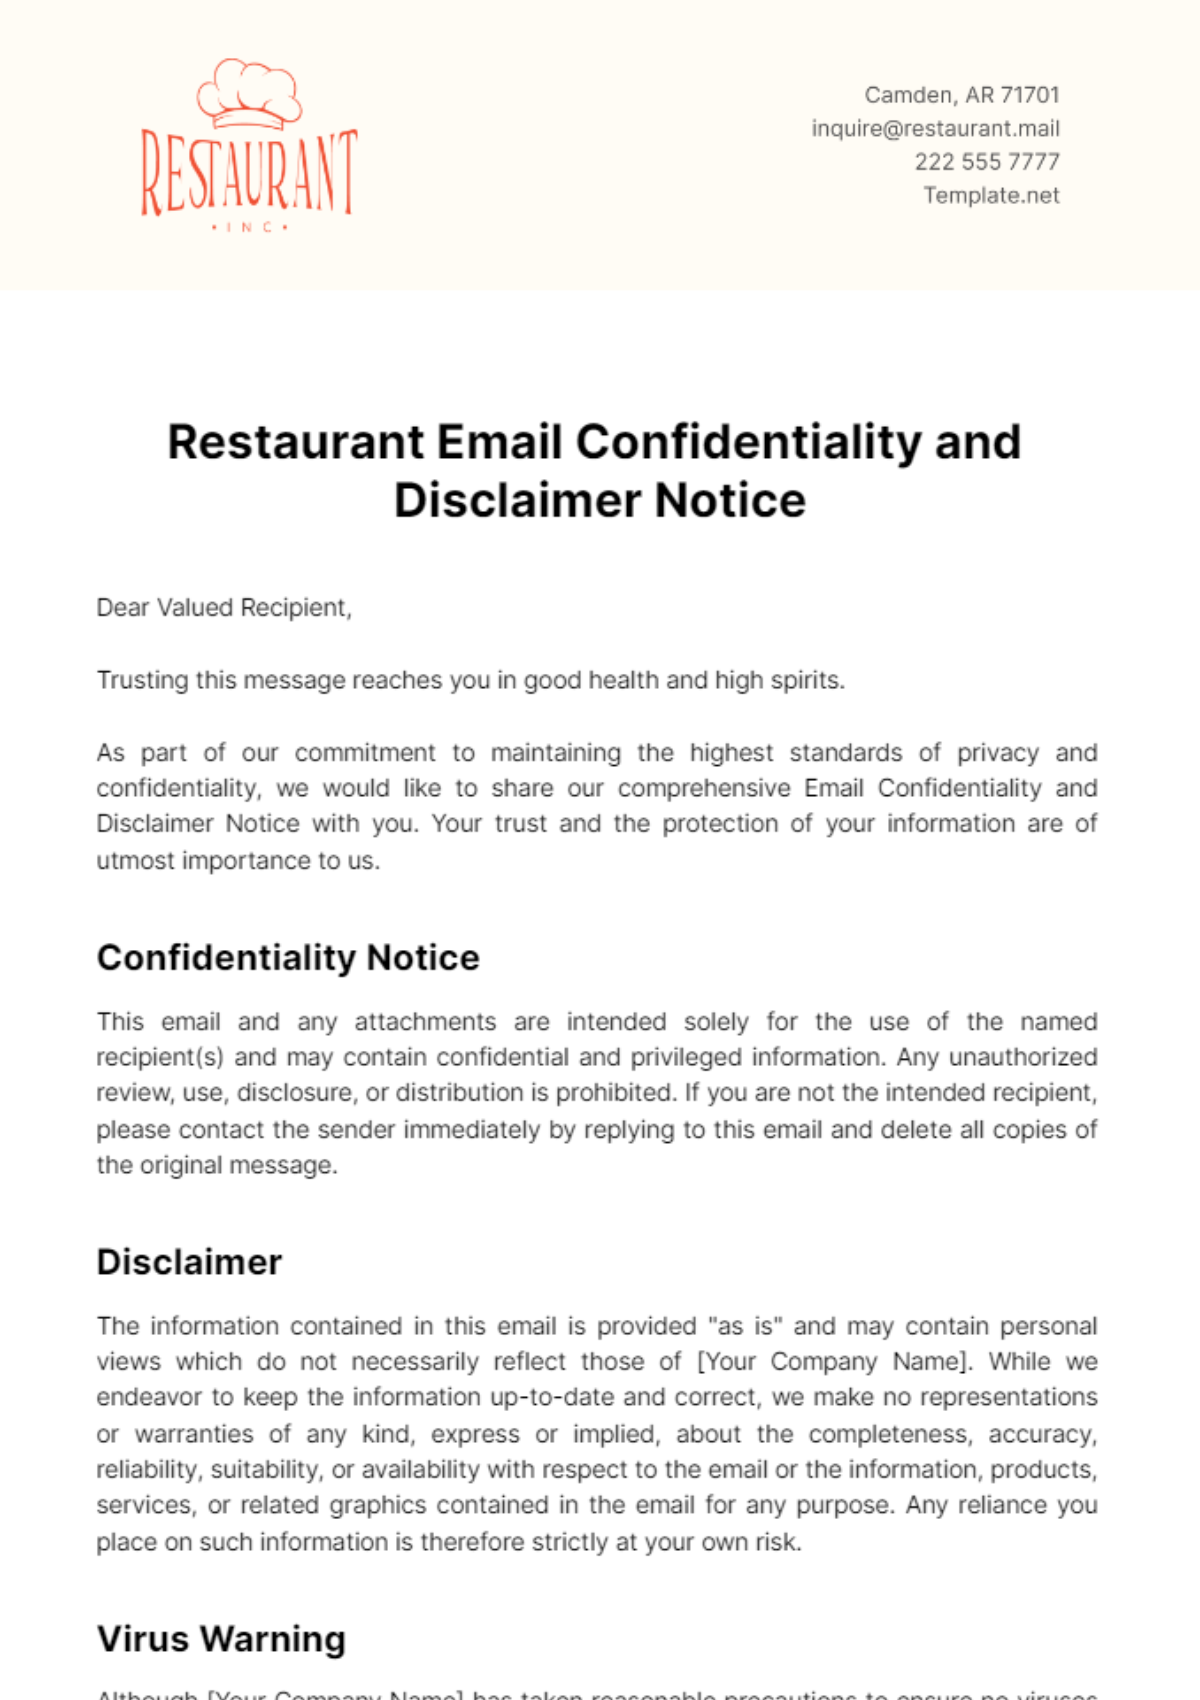 Free Restaurant Email Confidentiality and Disclaimer Notice Template